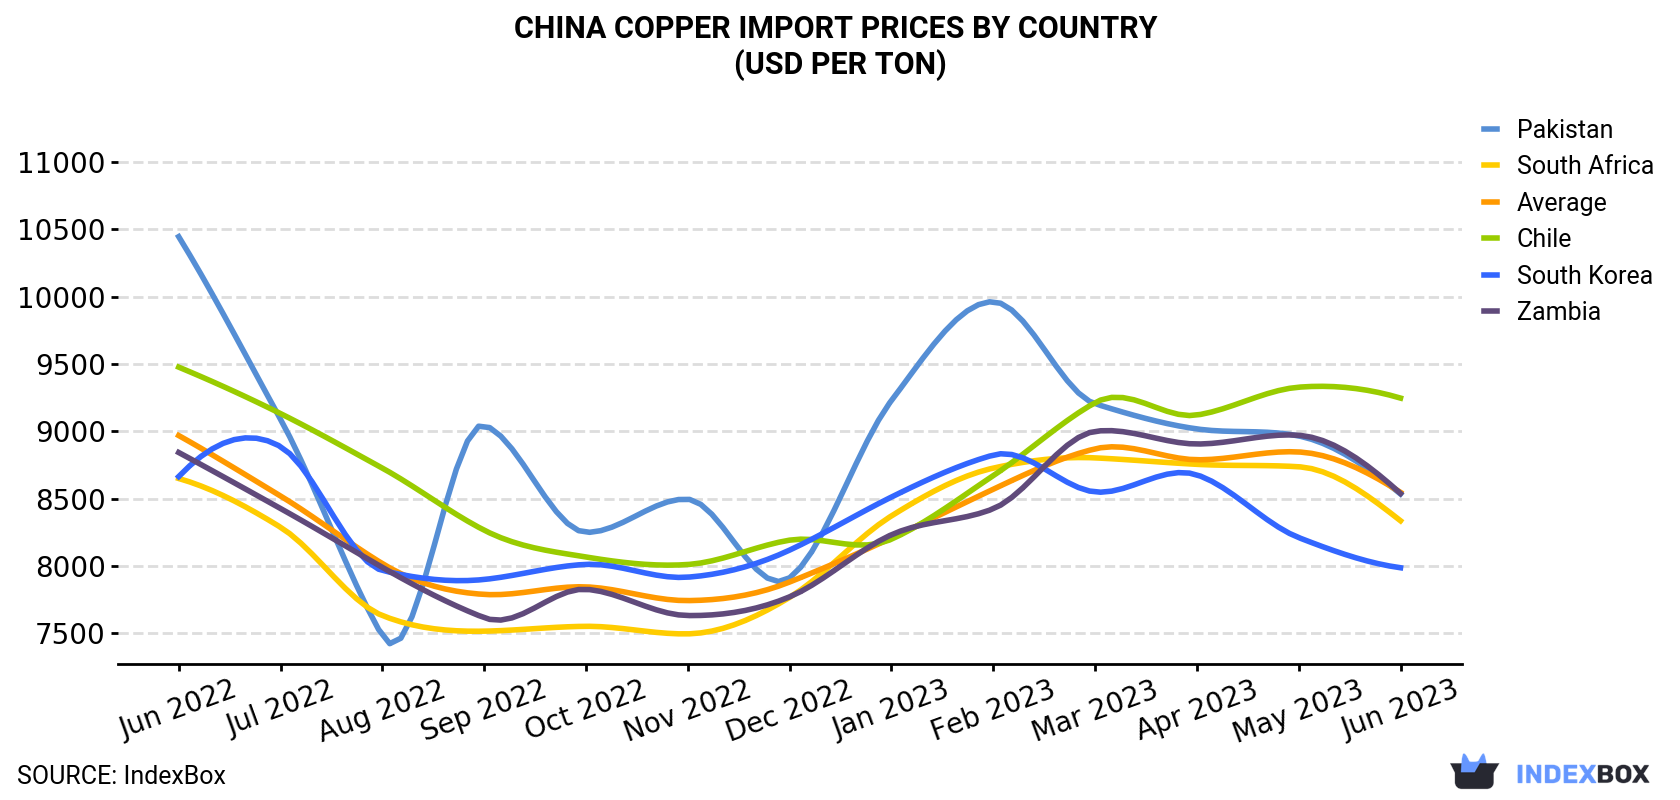 China Copper Import Prices By Country (USD Per Ton)